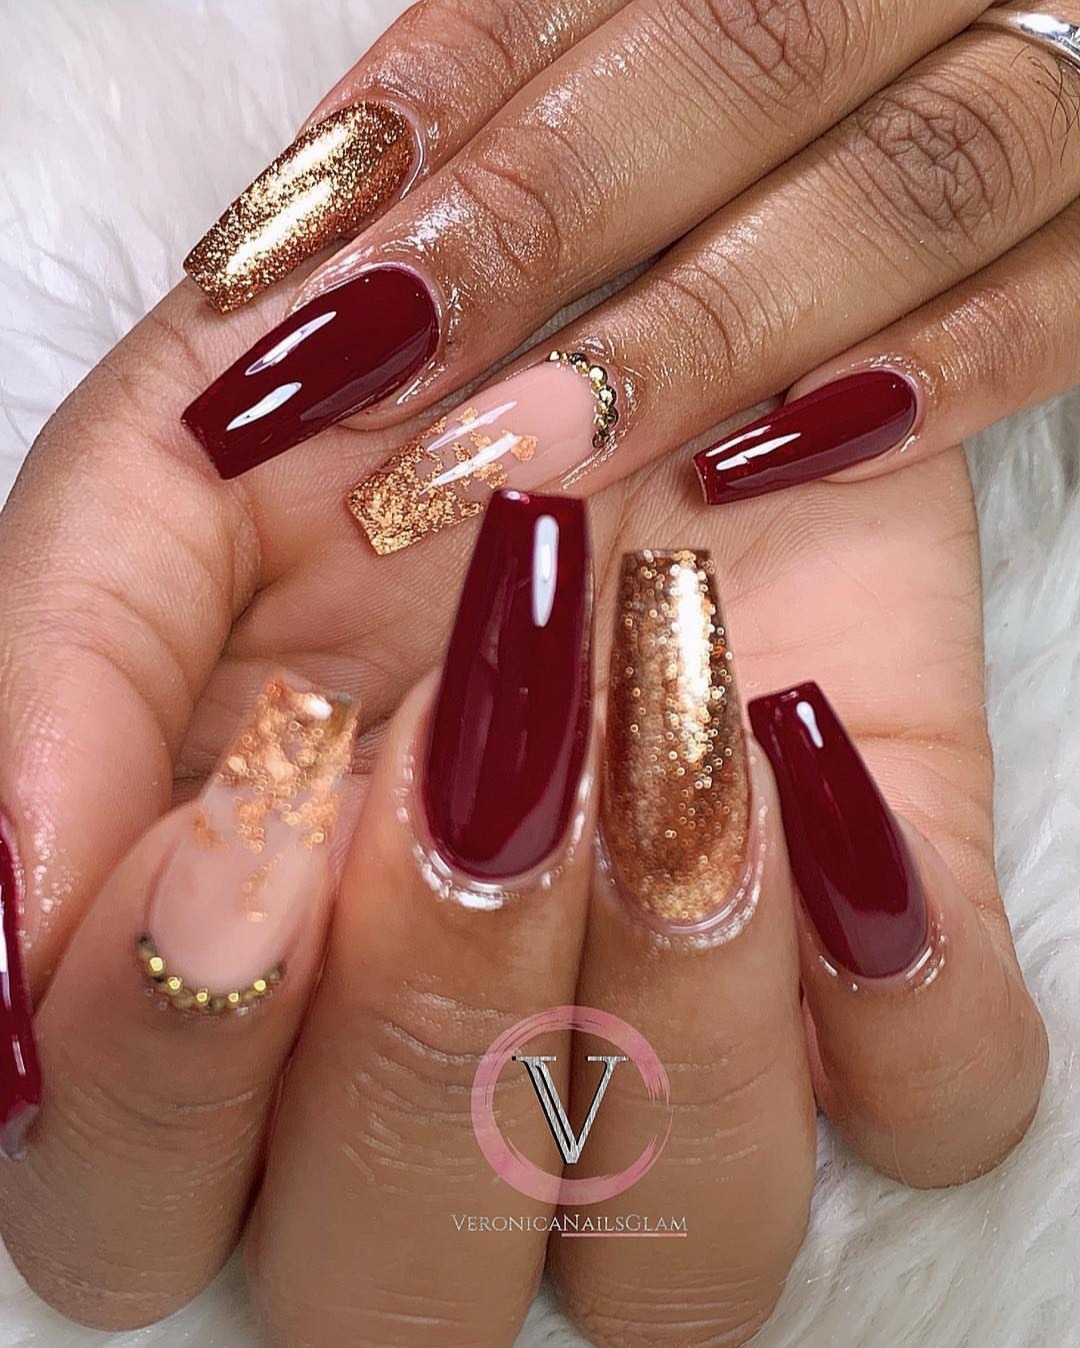 simple winter nails red gold glitter - StyleFrizz | Photo Gallery